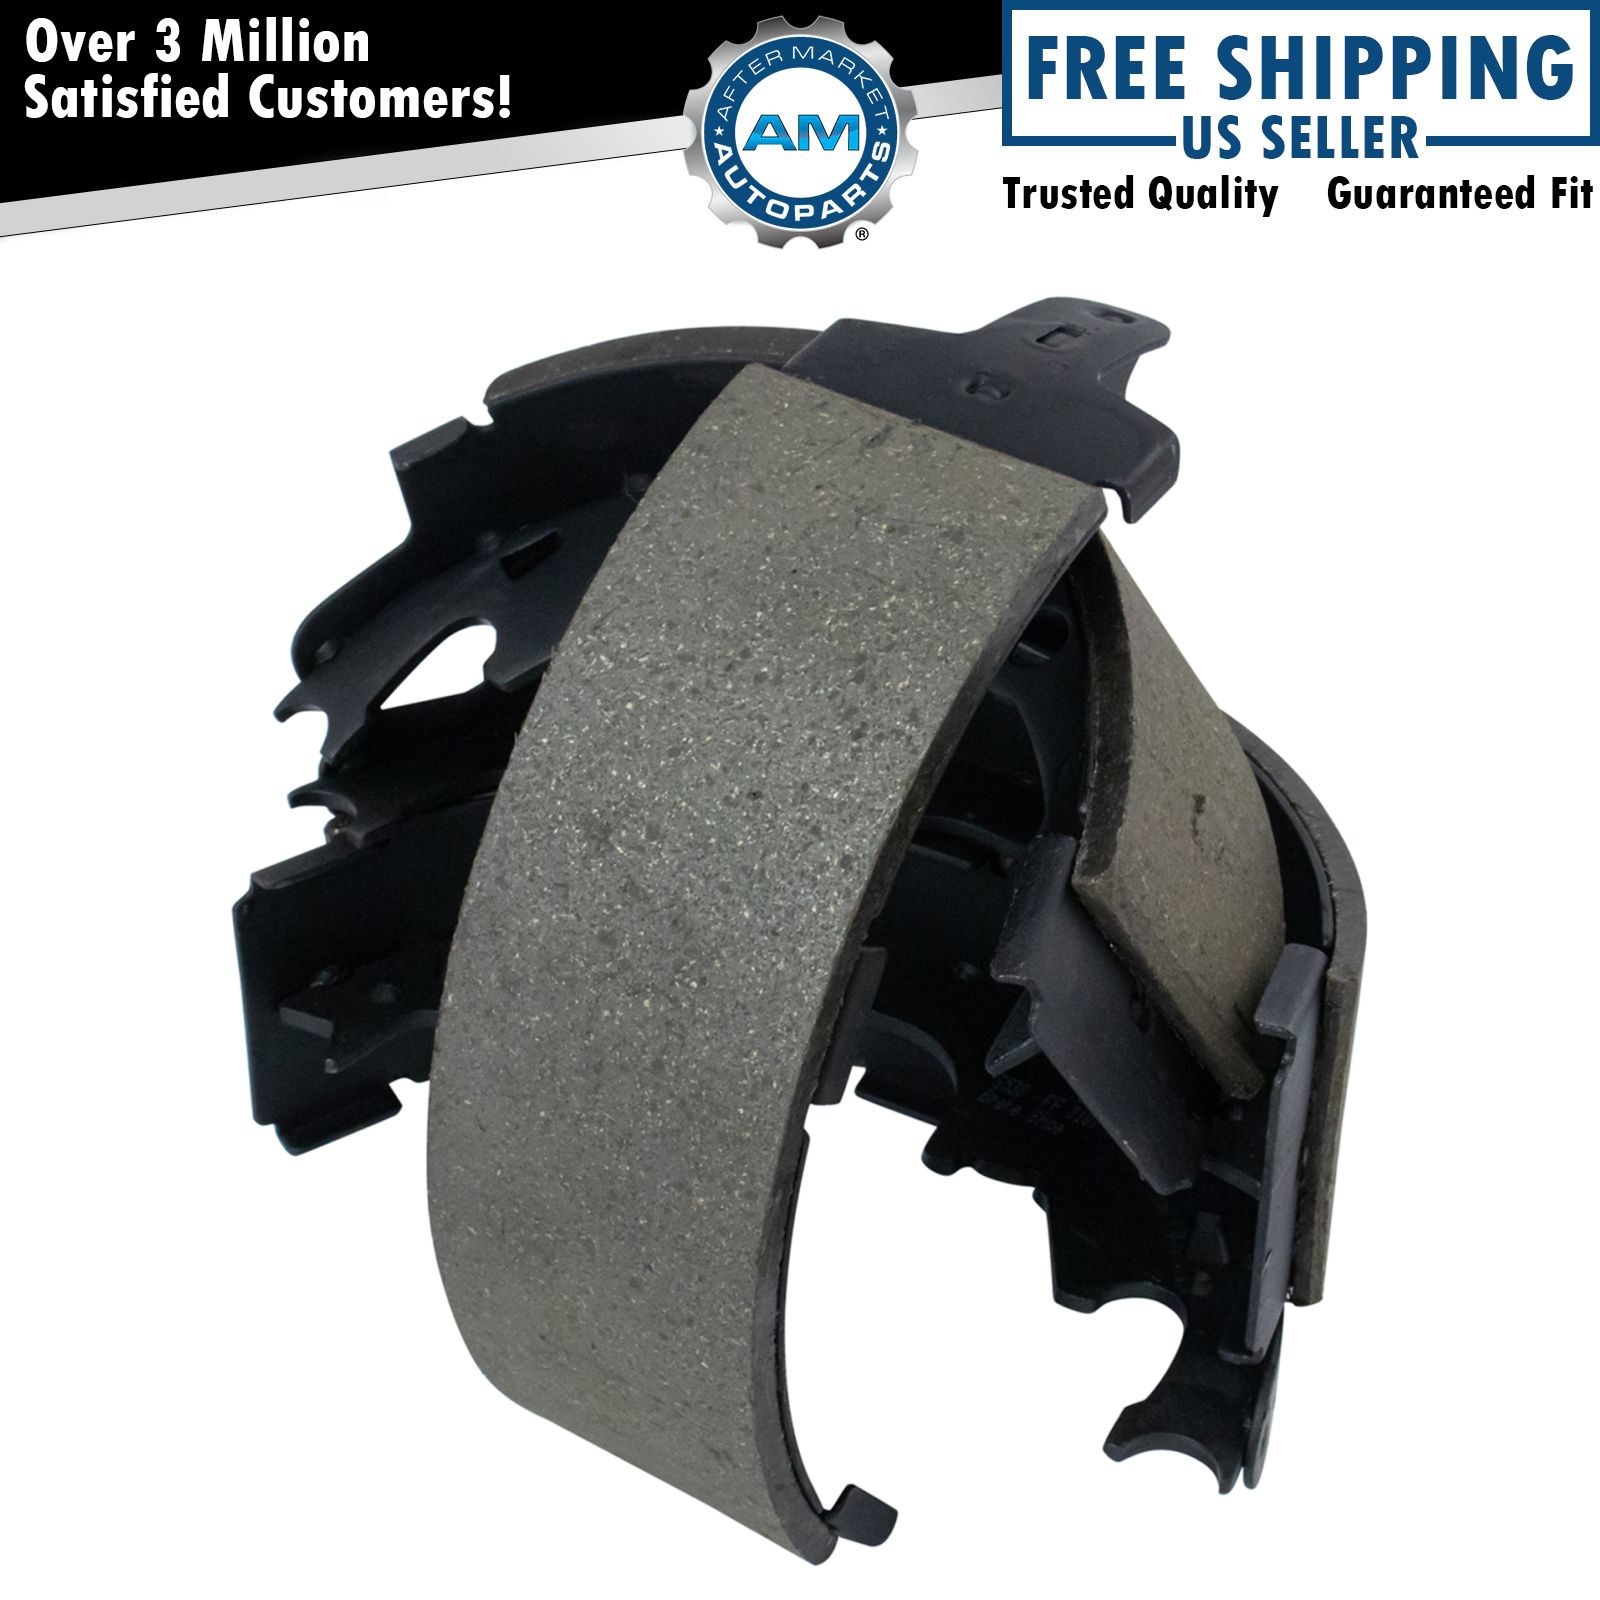 Rear Bonded Drum Brake Shoes Set for Dodge Chrysler Jeep Plymouth